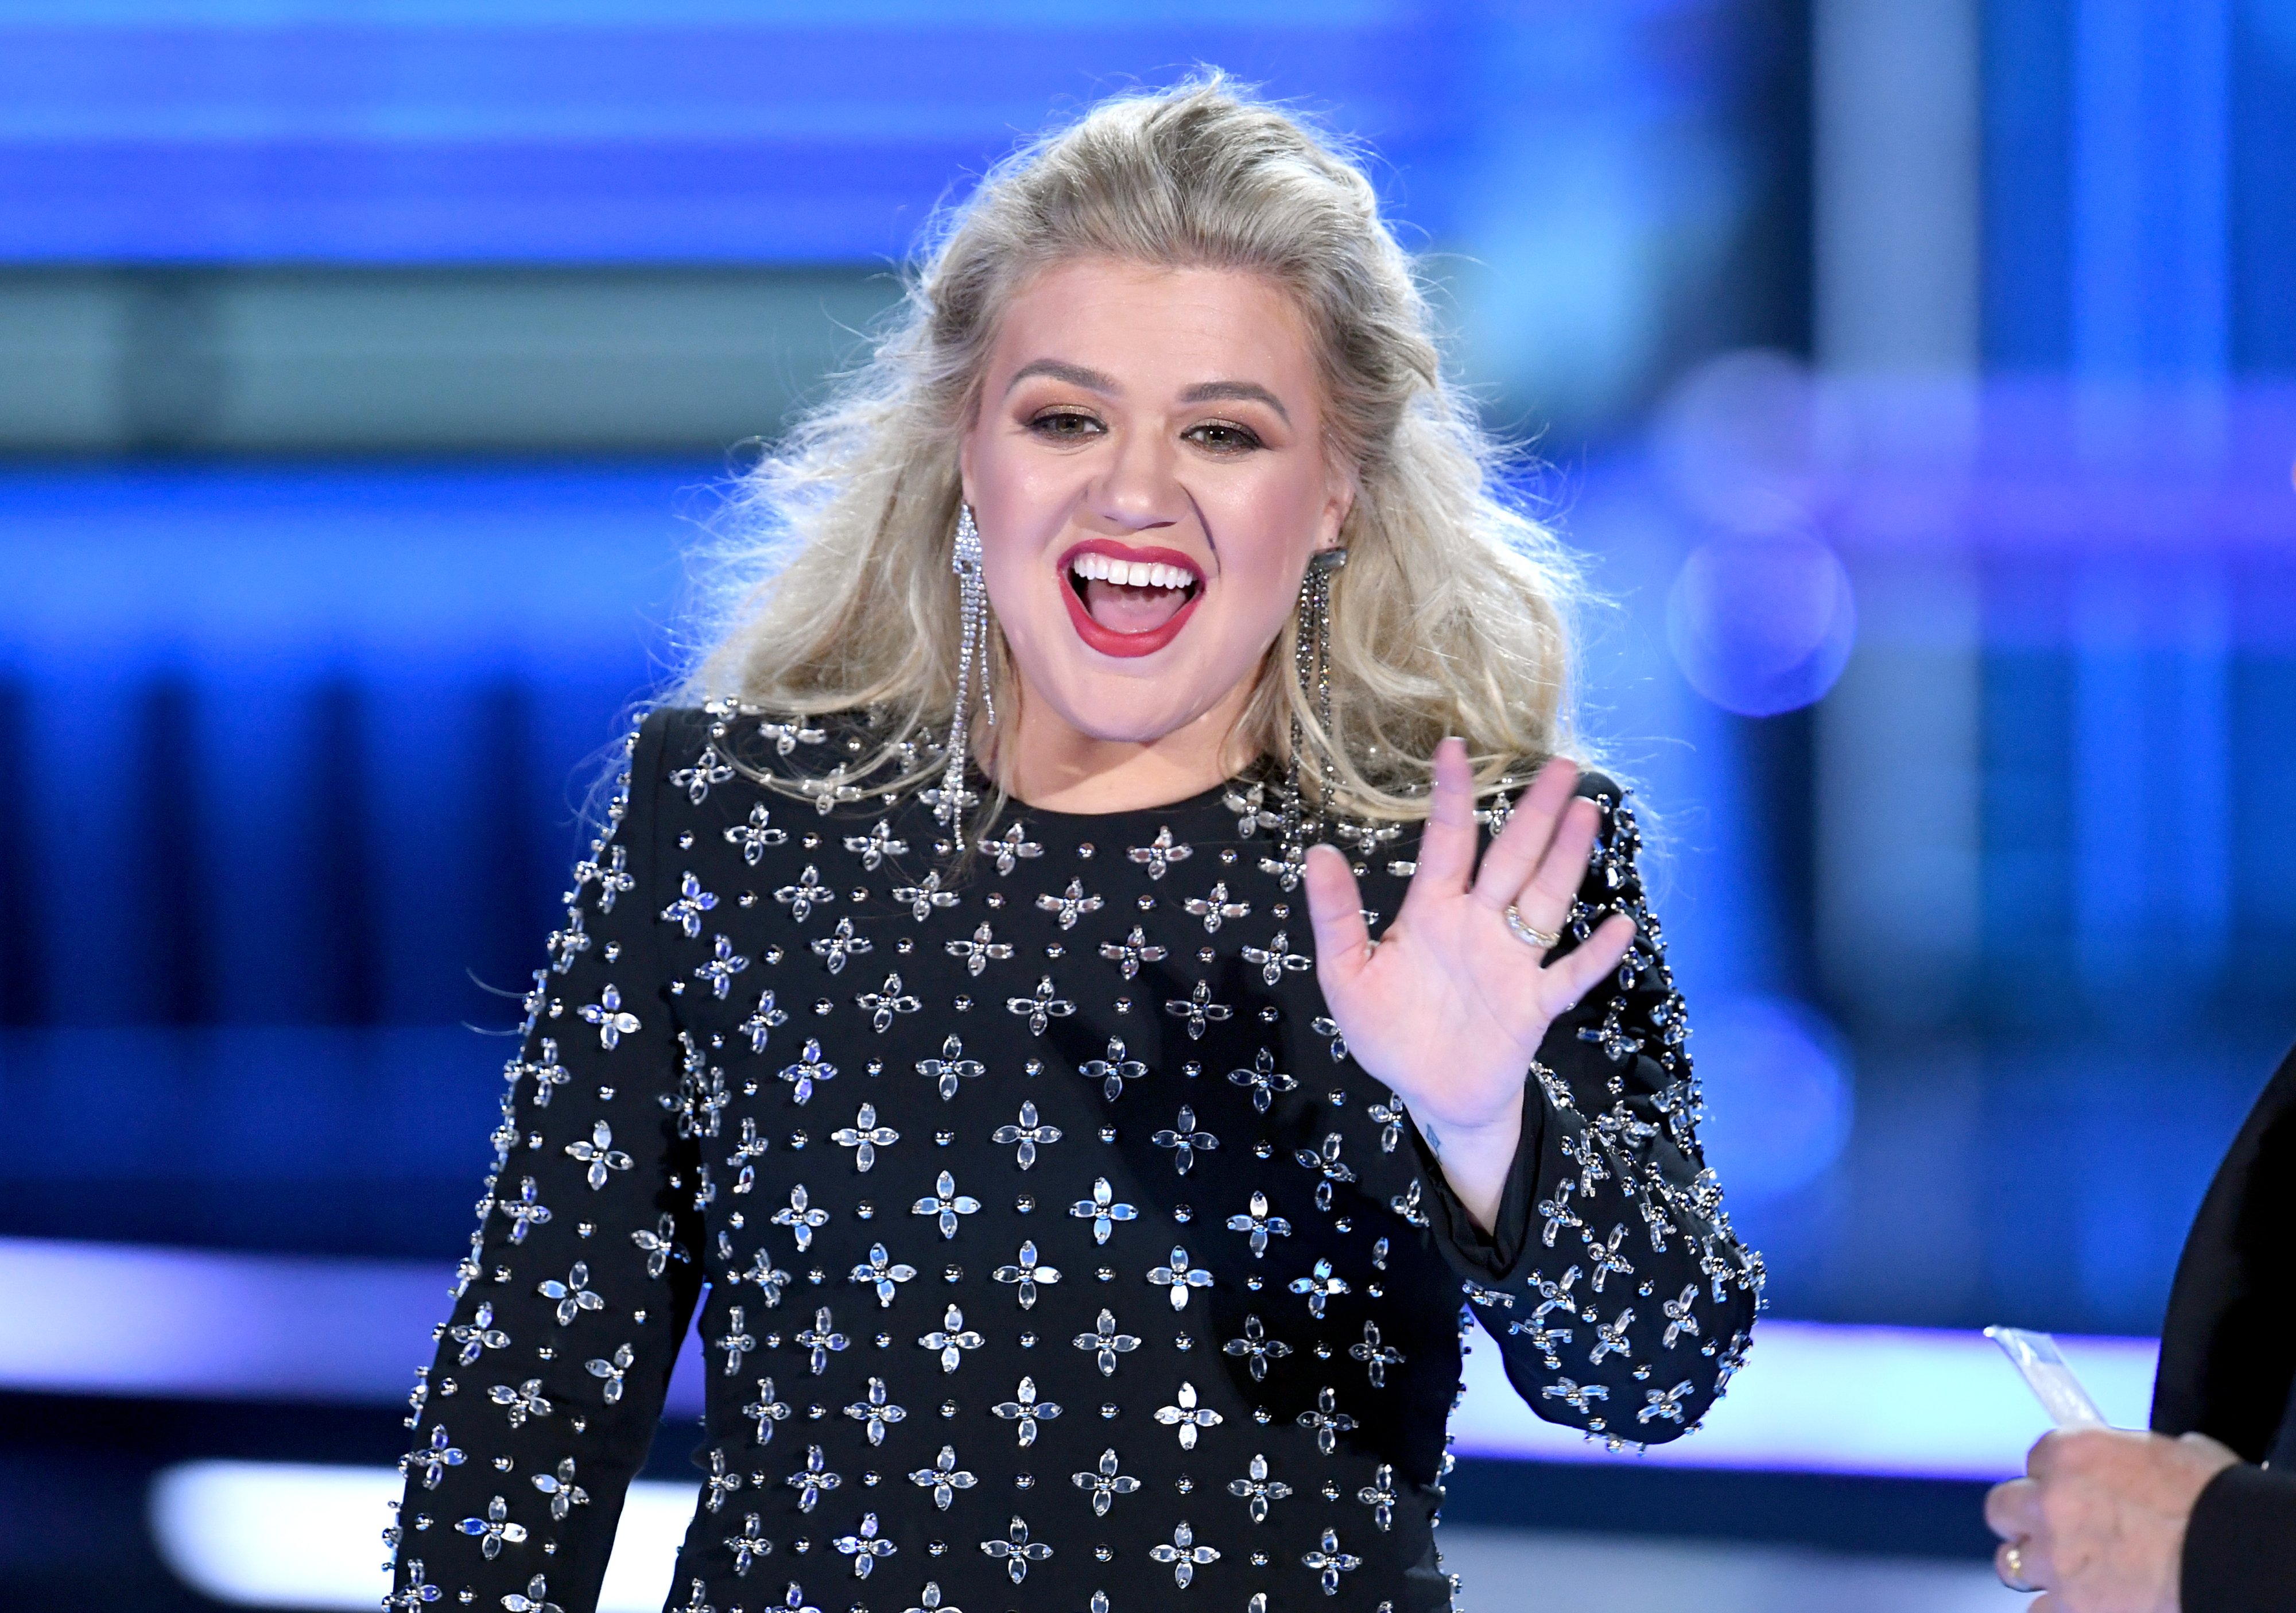 Kelly Clarkson speaks onstage during the 2019 Billboard Music Awards on May 01, 2019, in Las Vegas, Nevada. | Source: Getty Images.